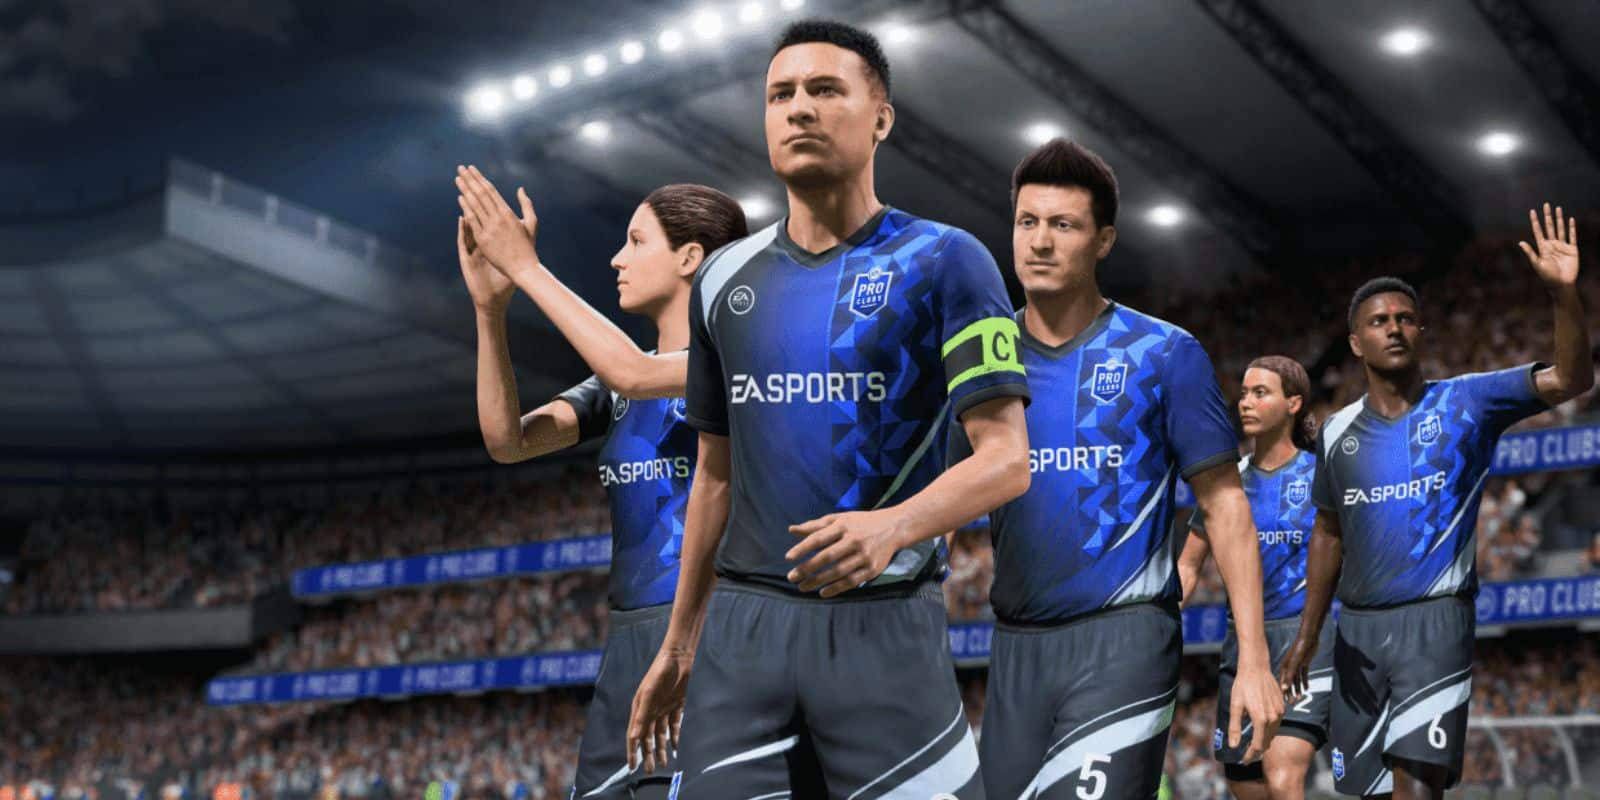 FIFA 23 Pro Clubs Team Shot Five Players of Eleven in Unique Game Rode, Either Winning Game or Getting Ready to Play